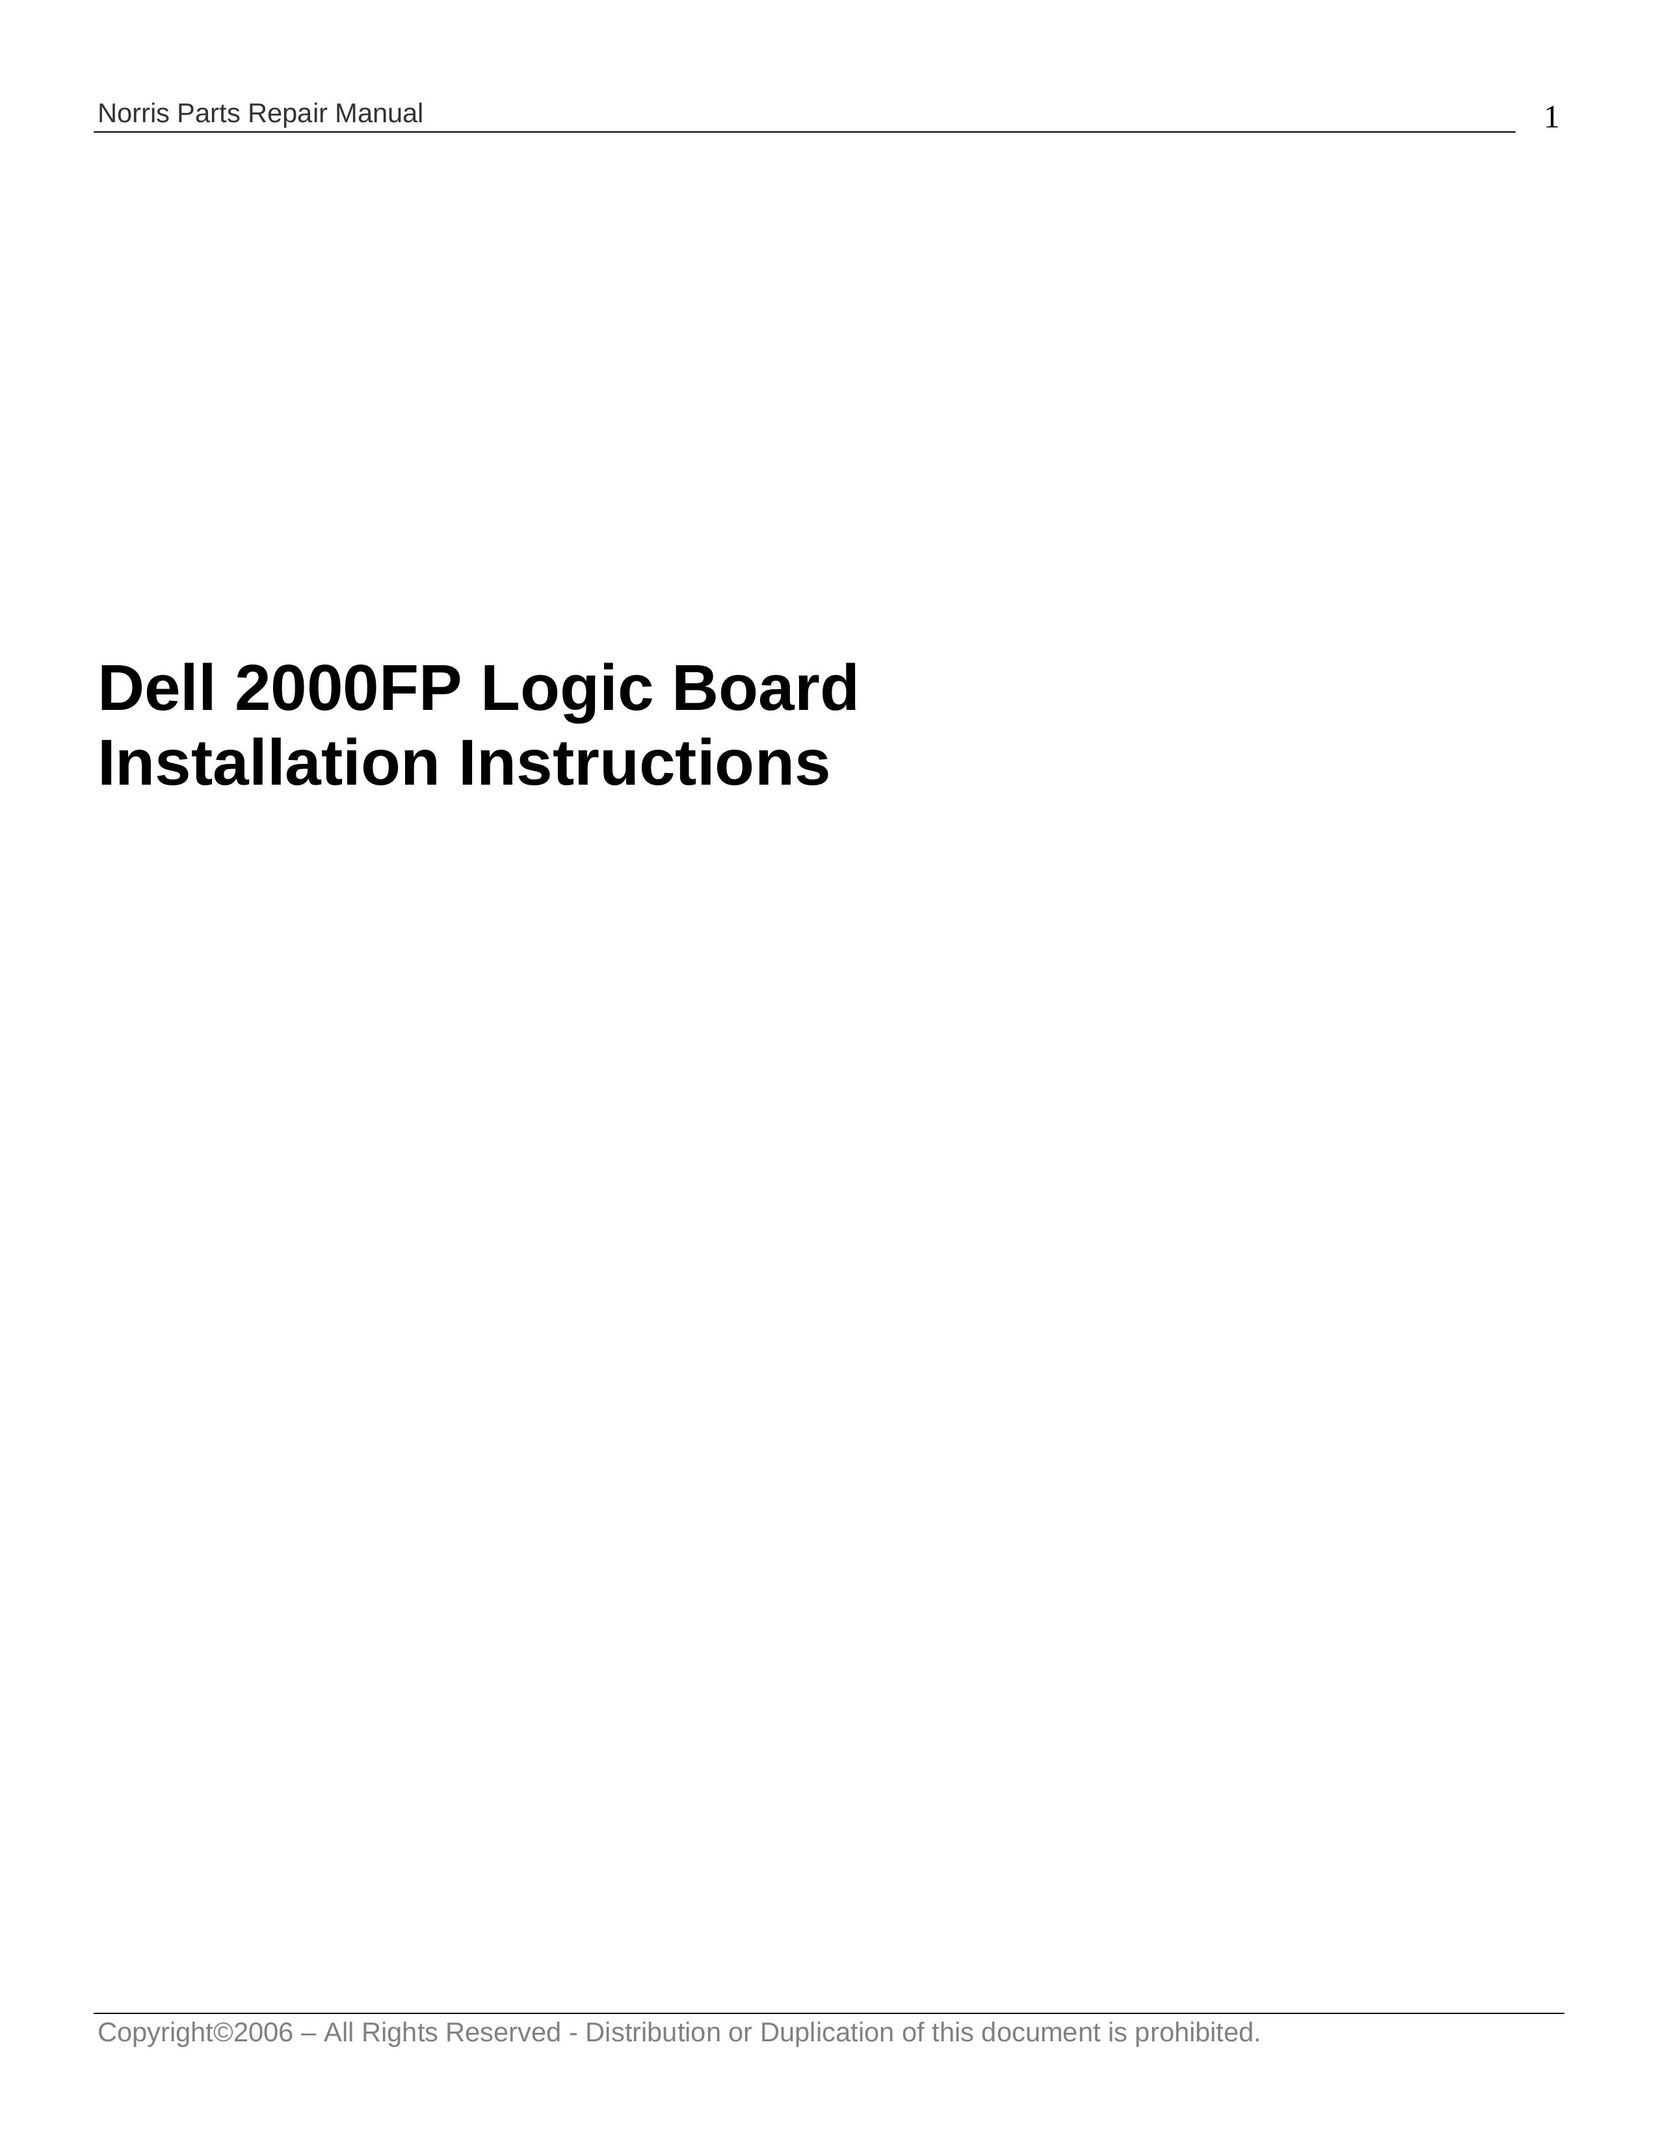 Dell 2000FP Computer Hardware User Manual